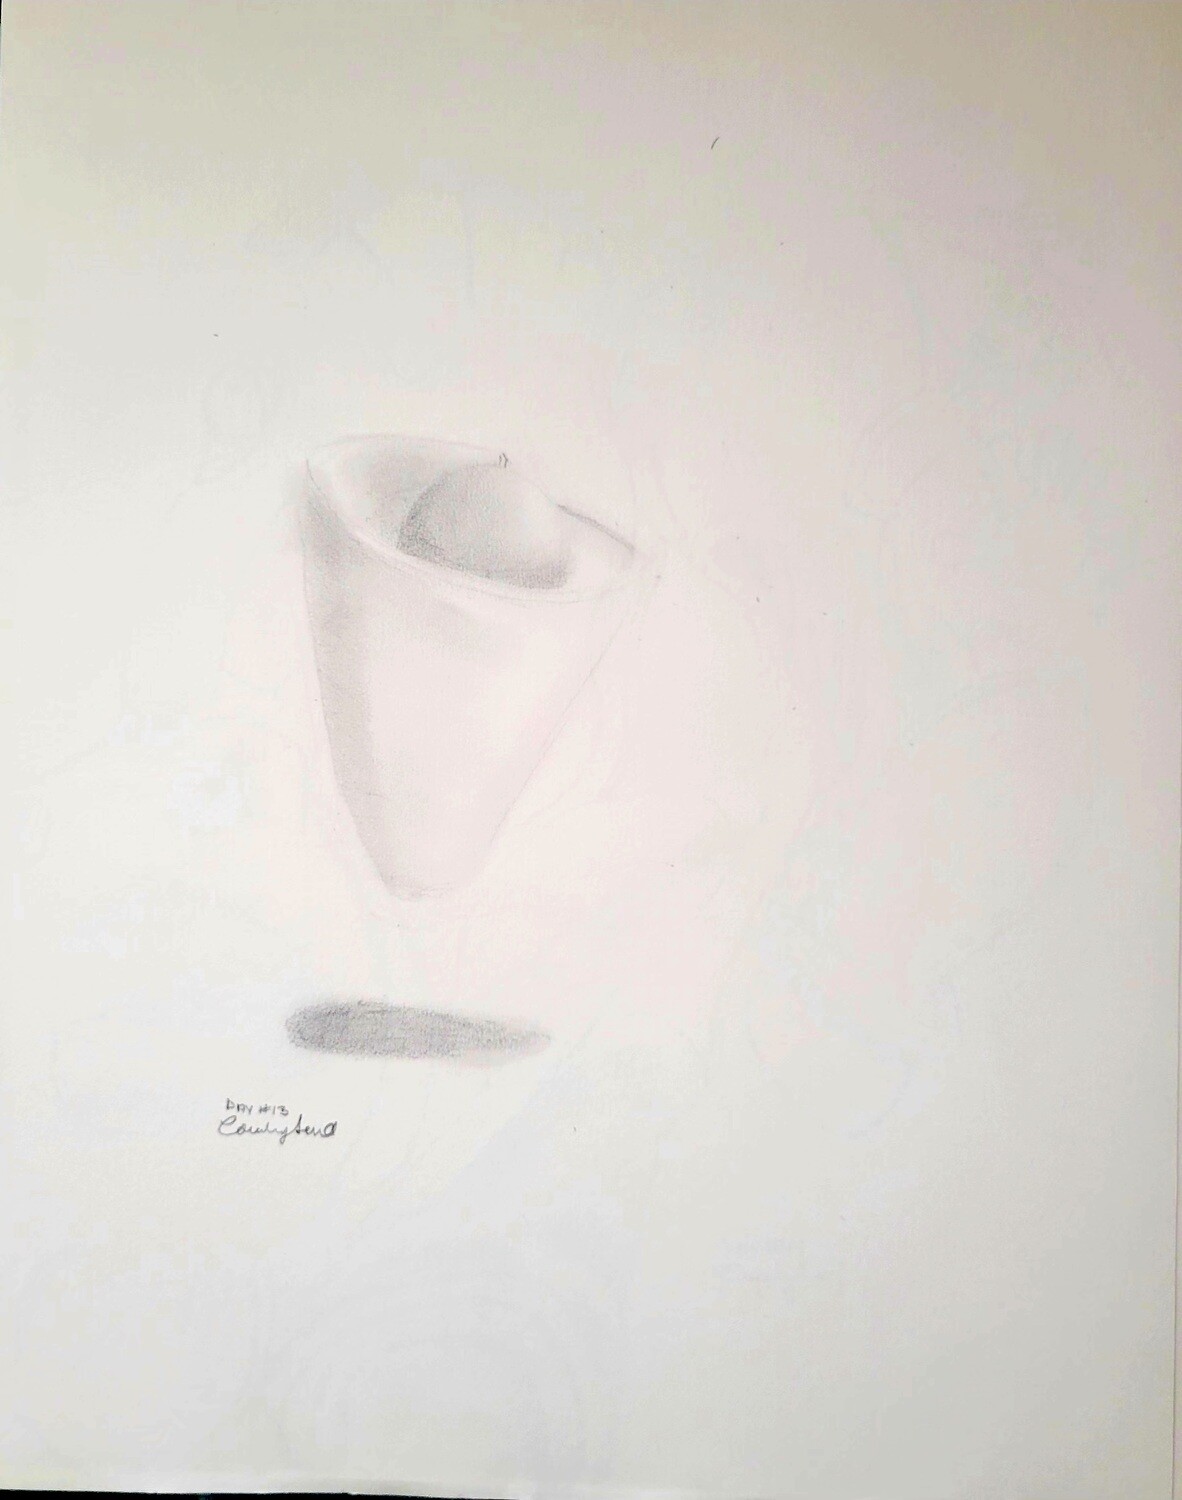 Floating Avocado Original pencil on paper 9 x 12 inches